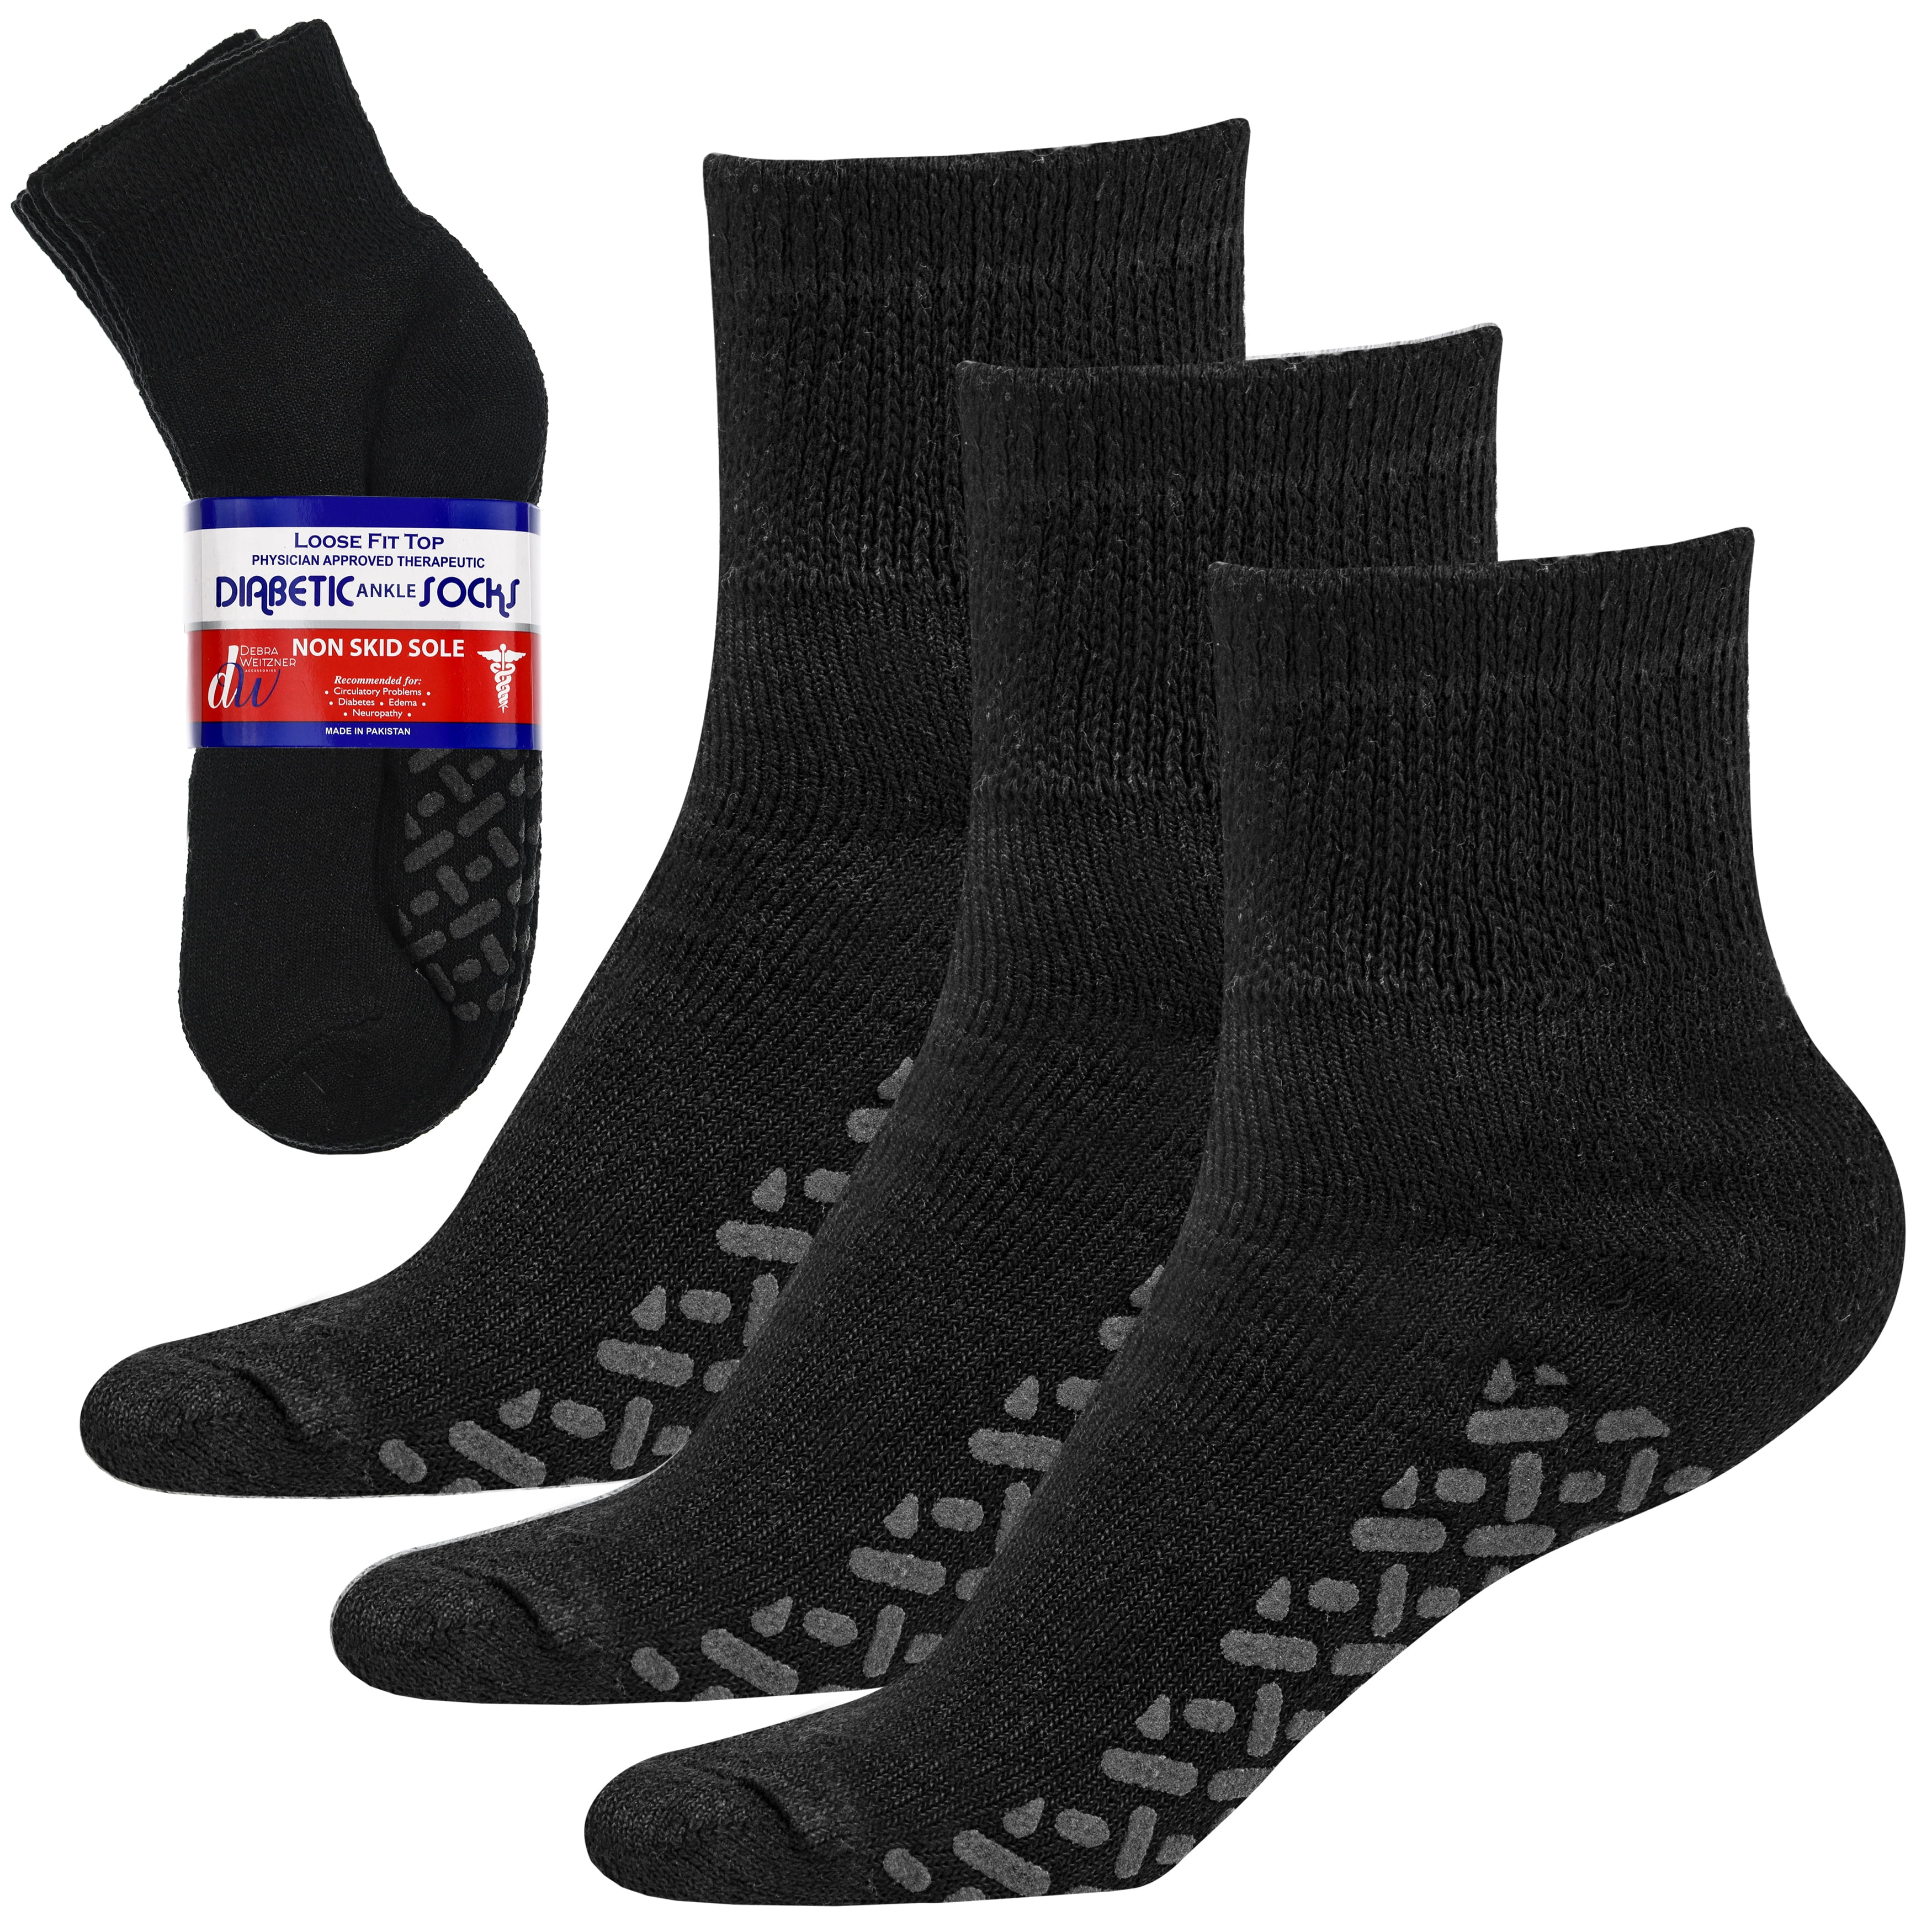 Physician Approved Loose Fit Top Diabetic Ankle Men Women socks. 